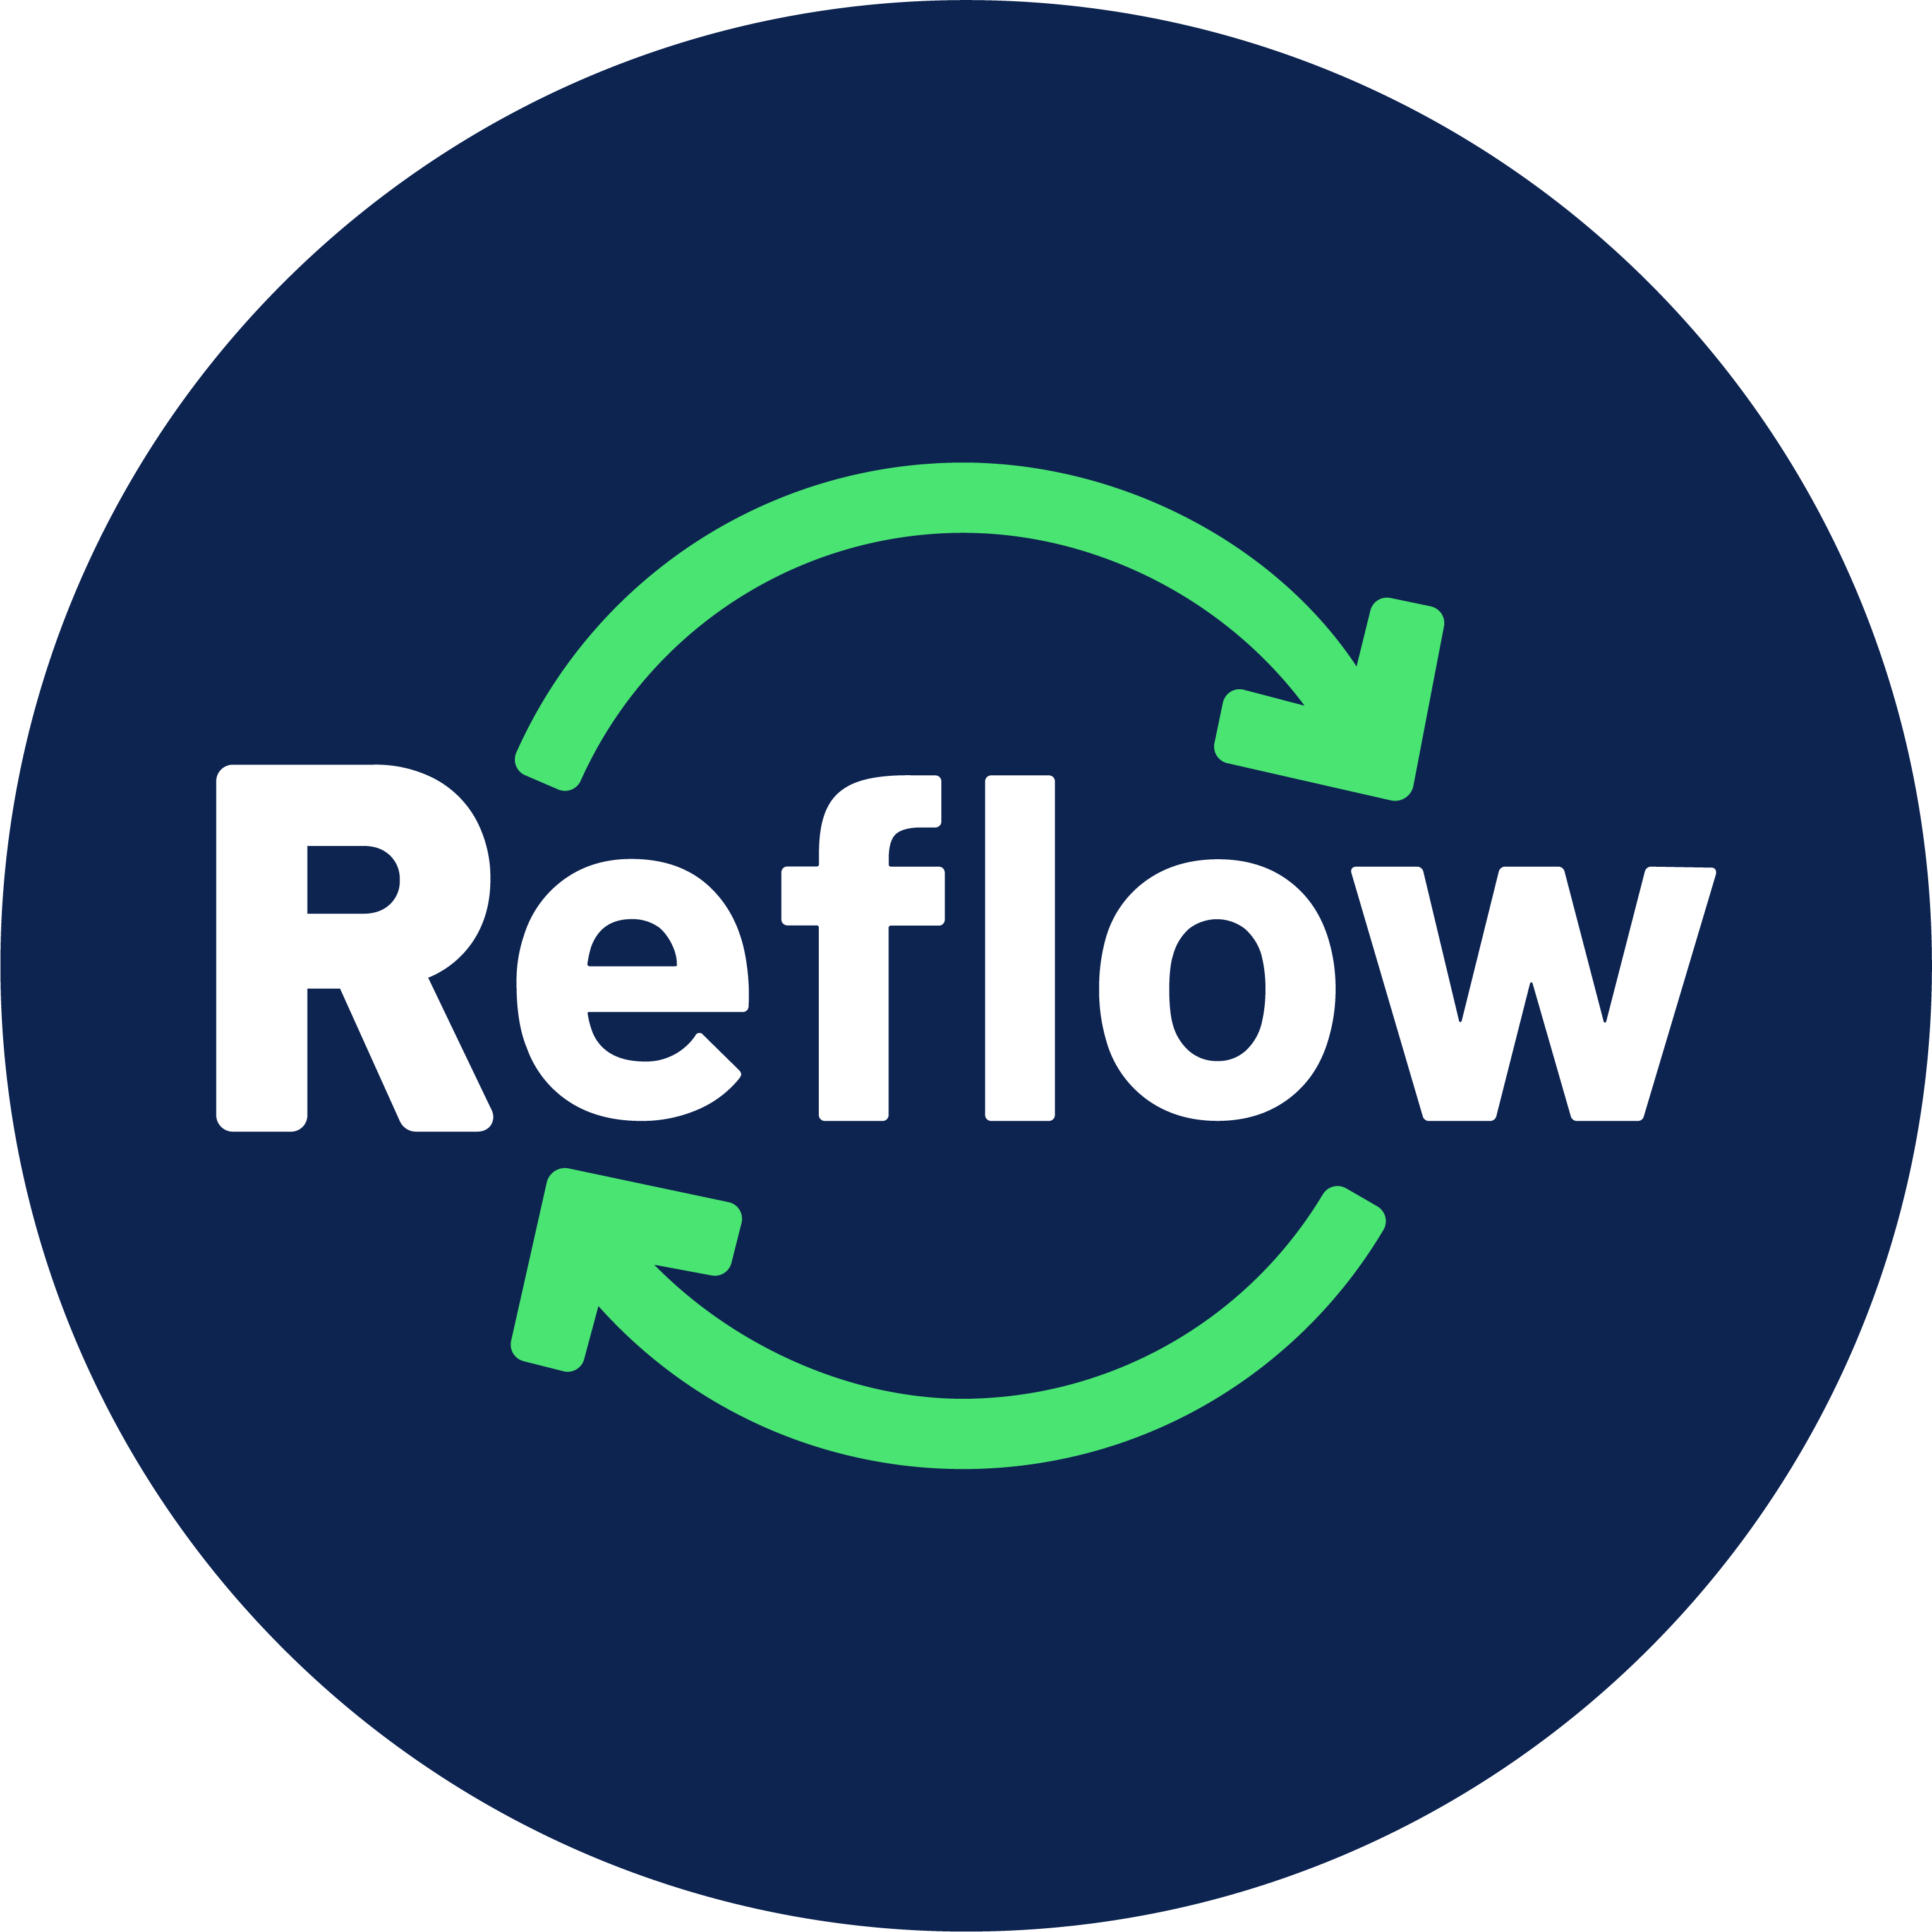 Co-creating circular and regenerative resources flows in cities ♻️  
#REFLOWeu - EU #H2020 funded project